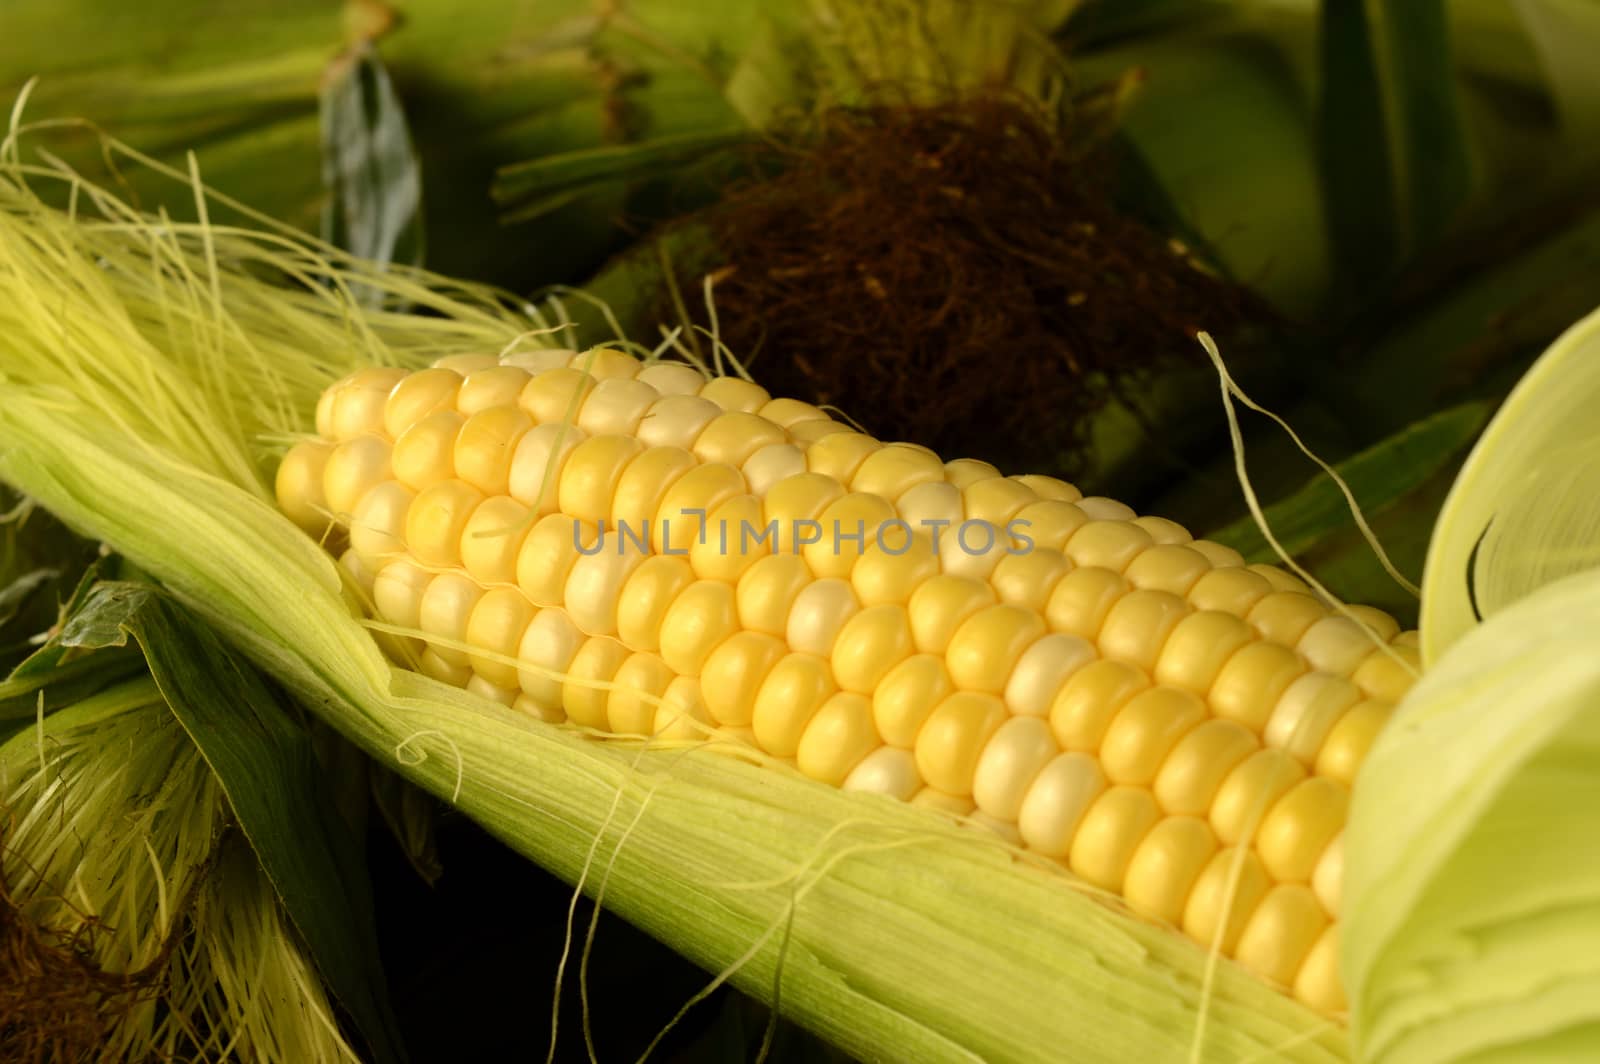 Several corn on the cobb with an ear being revealed to show the bright yellow vegetable underneath.